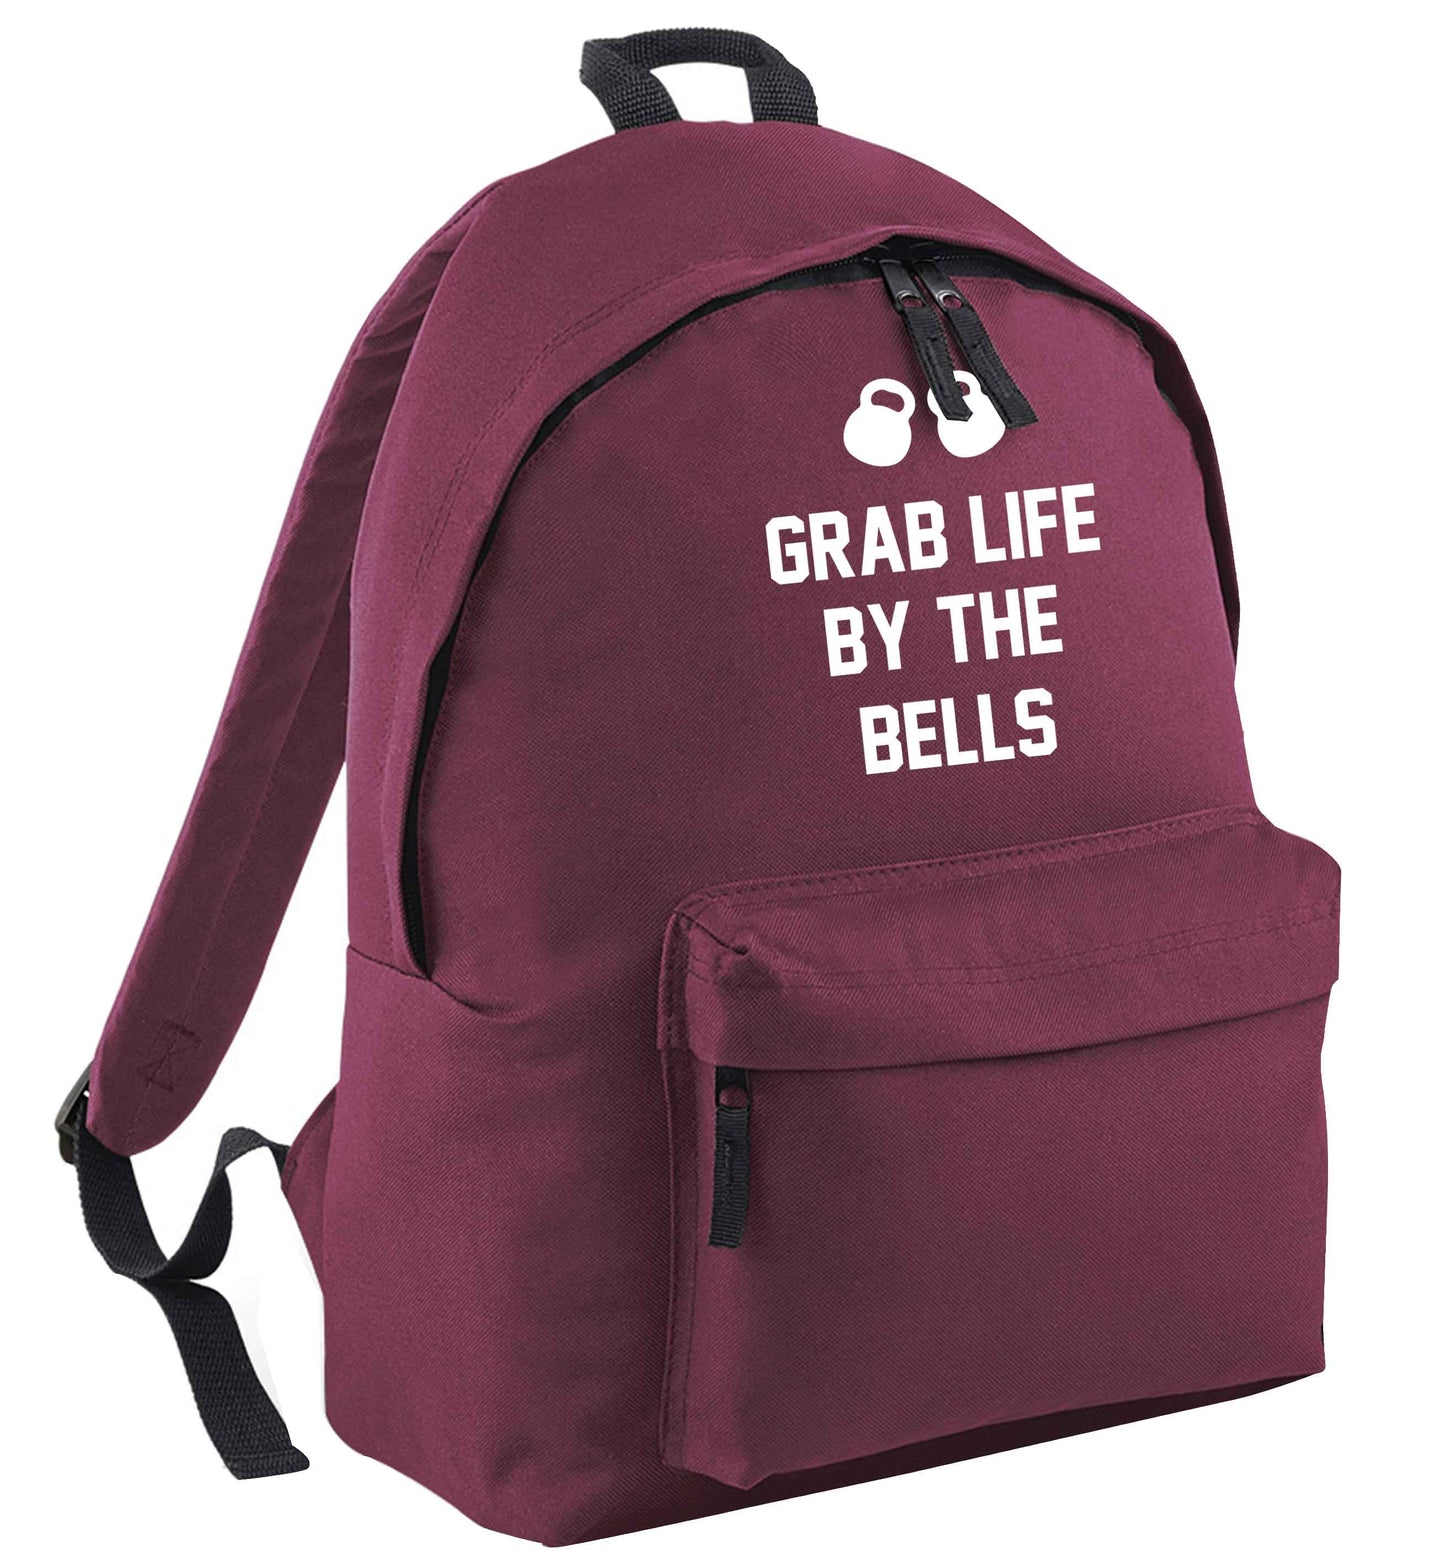 Grab life by the bells maroon adults backpack